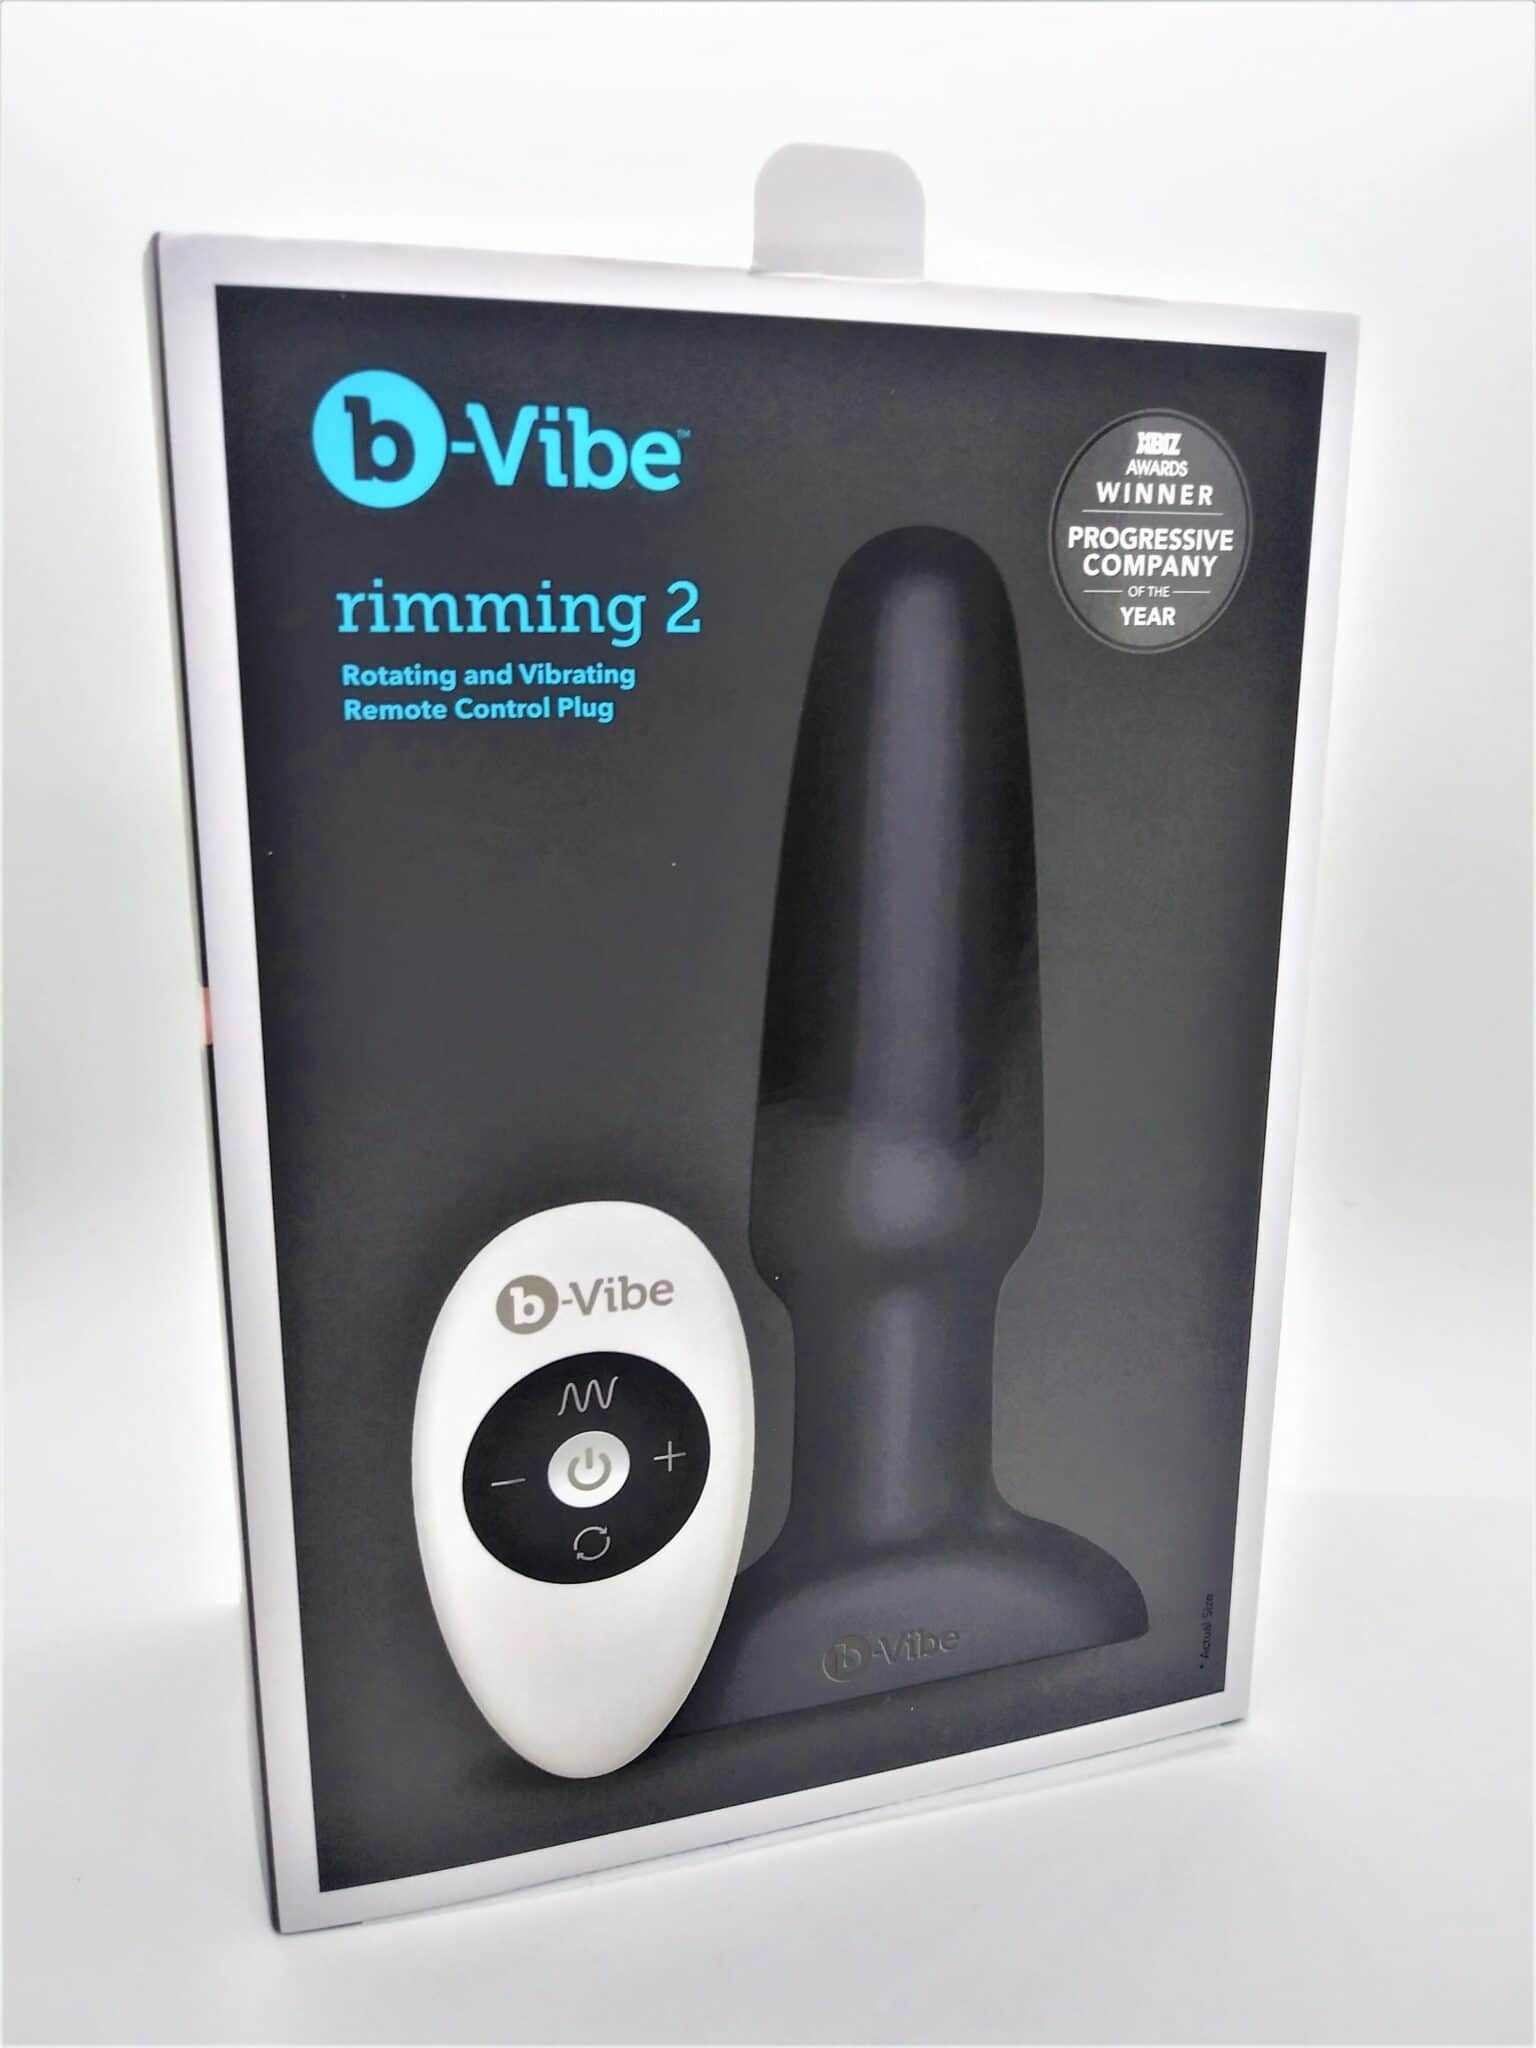 My Personal Experiences with b-Vibe Rimming Plug 2